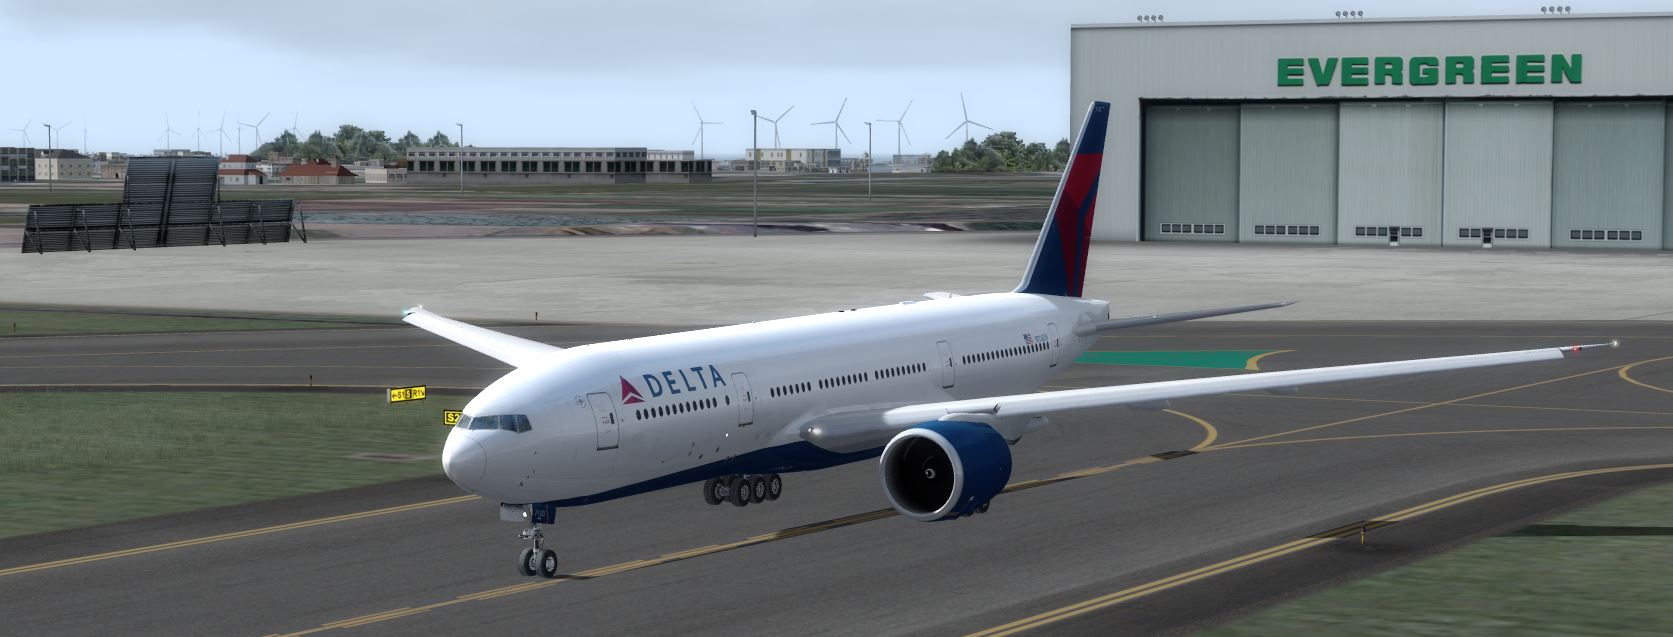 B777-200 Delta Airlines Standard Livery-7199 